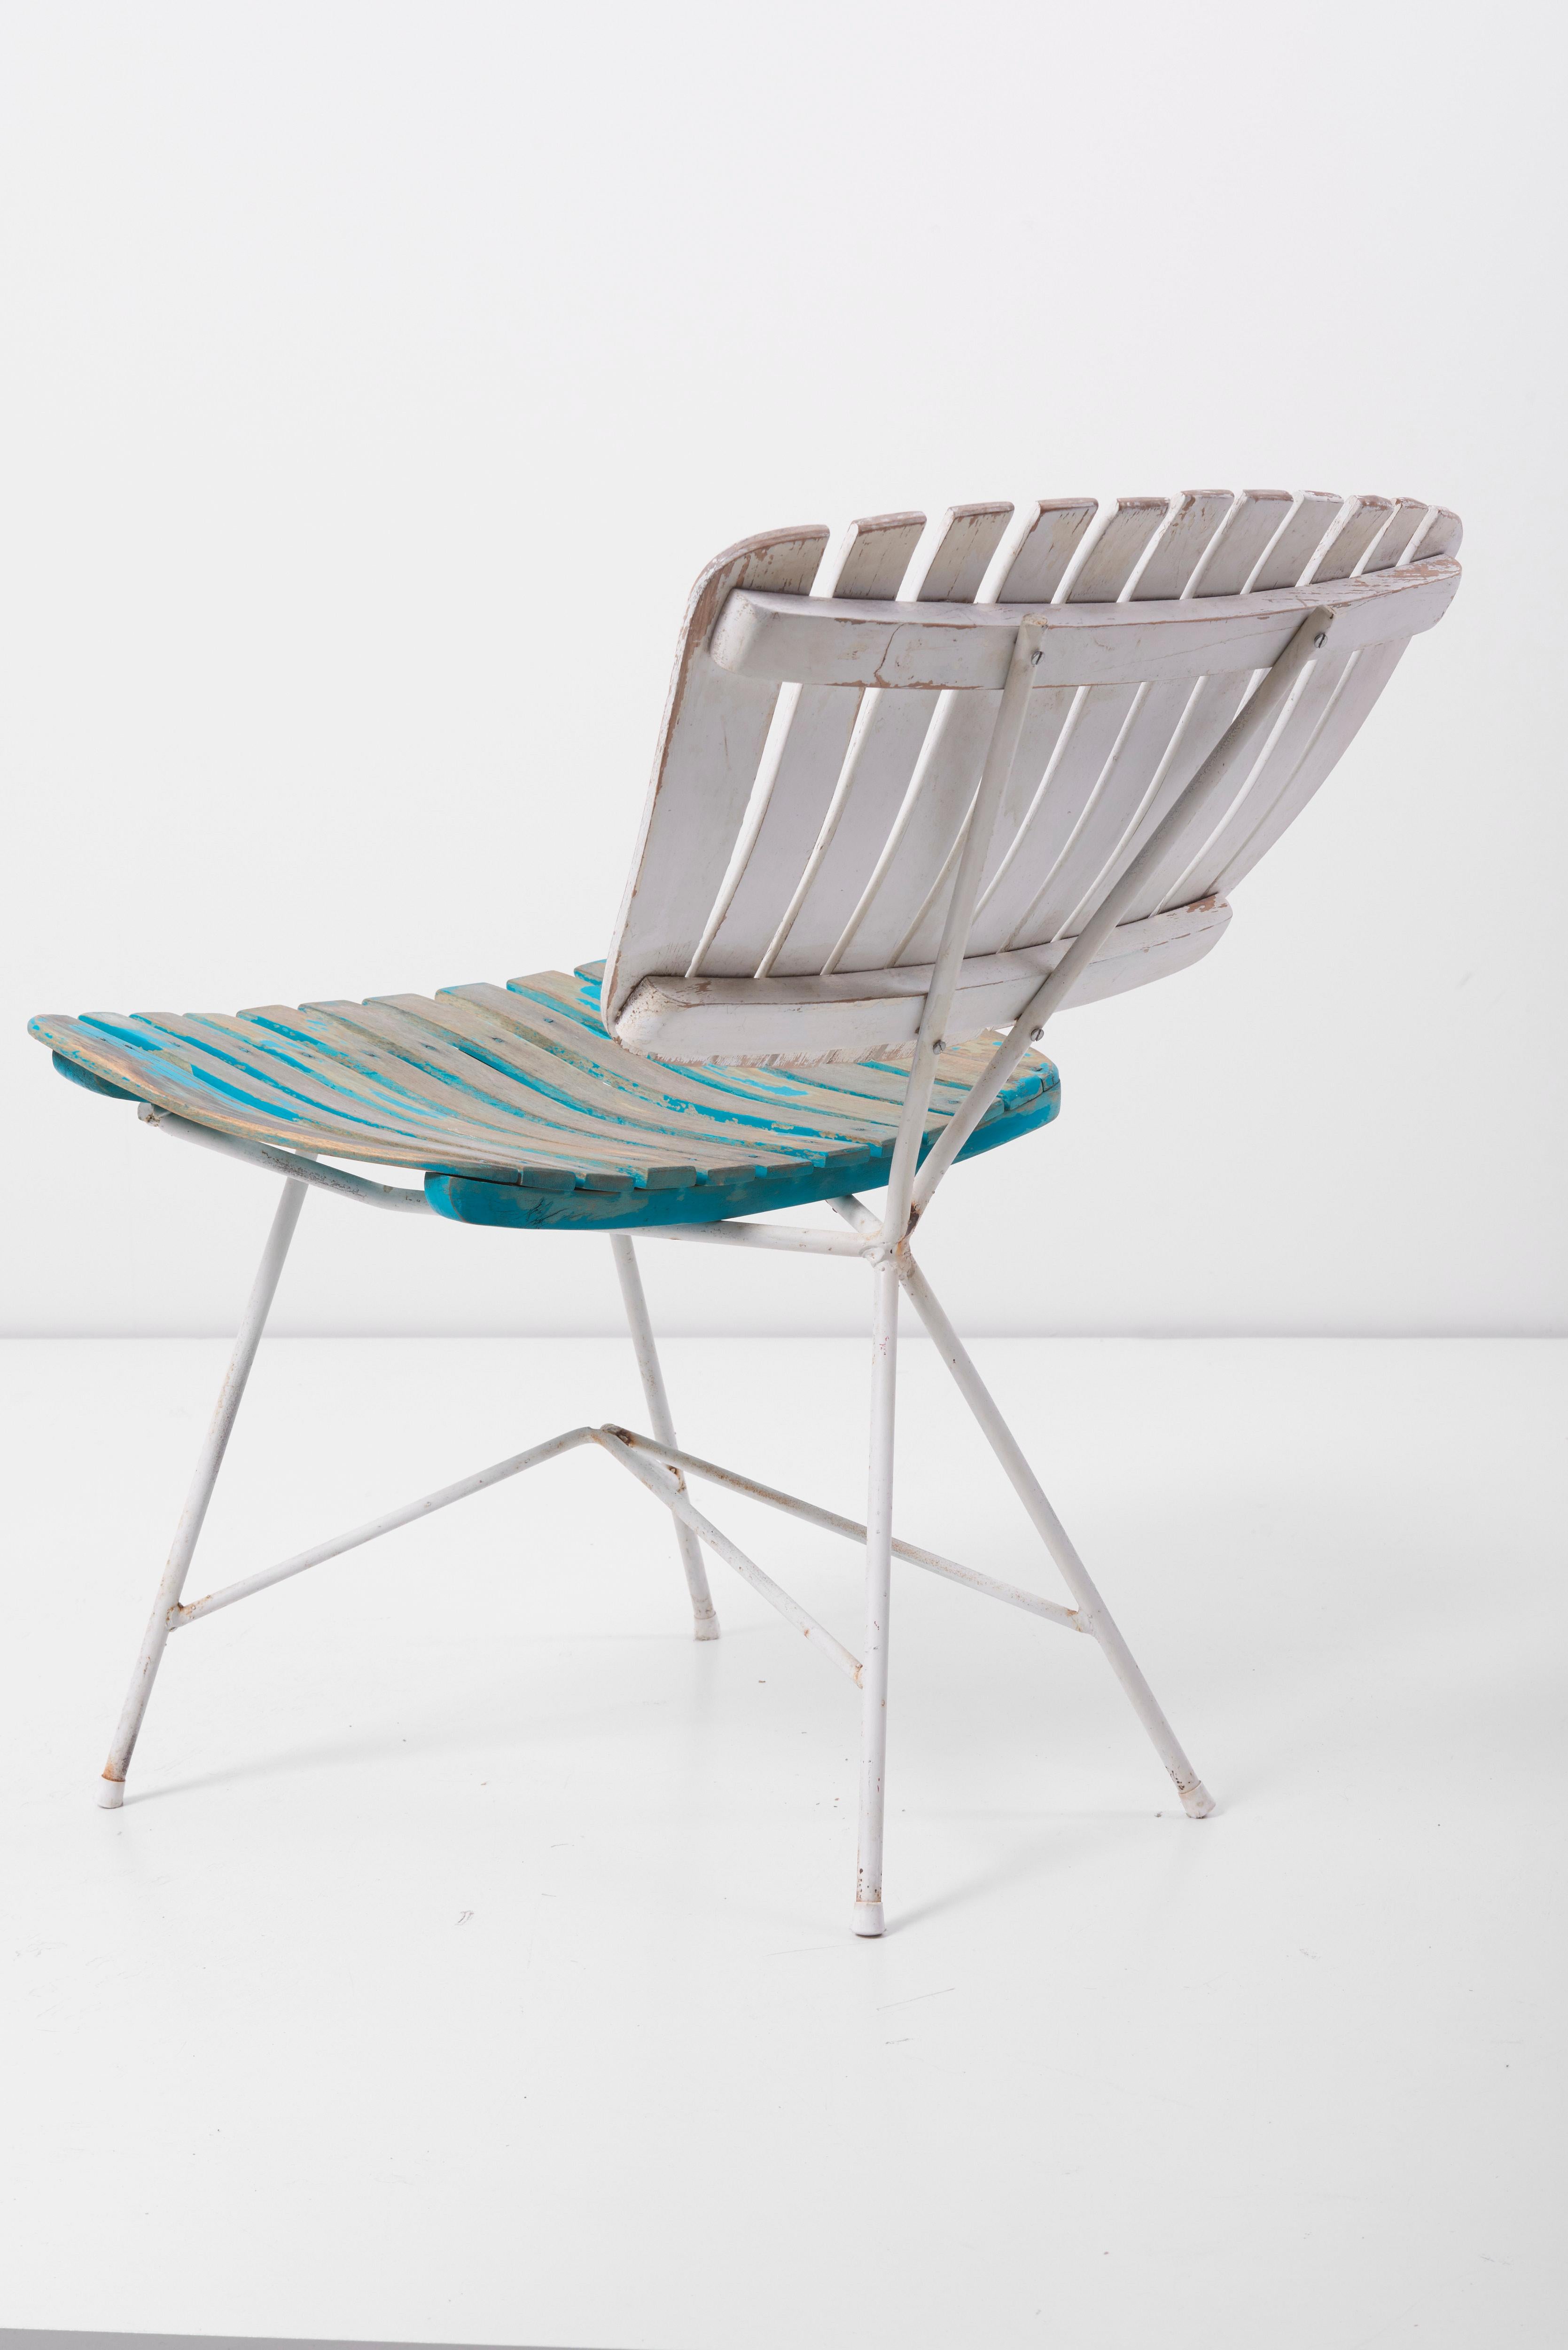 20th Century Wood Slat and Iron Low Lounge Chair by Arthur Umanoff for Raymor US, 1950s